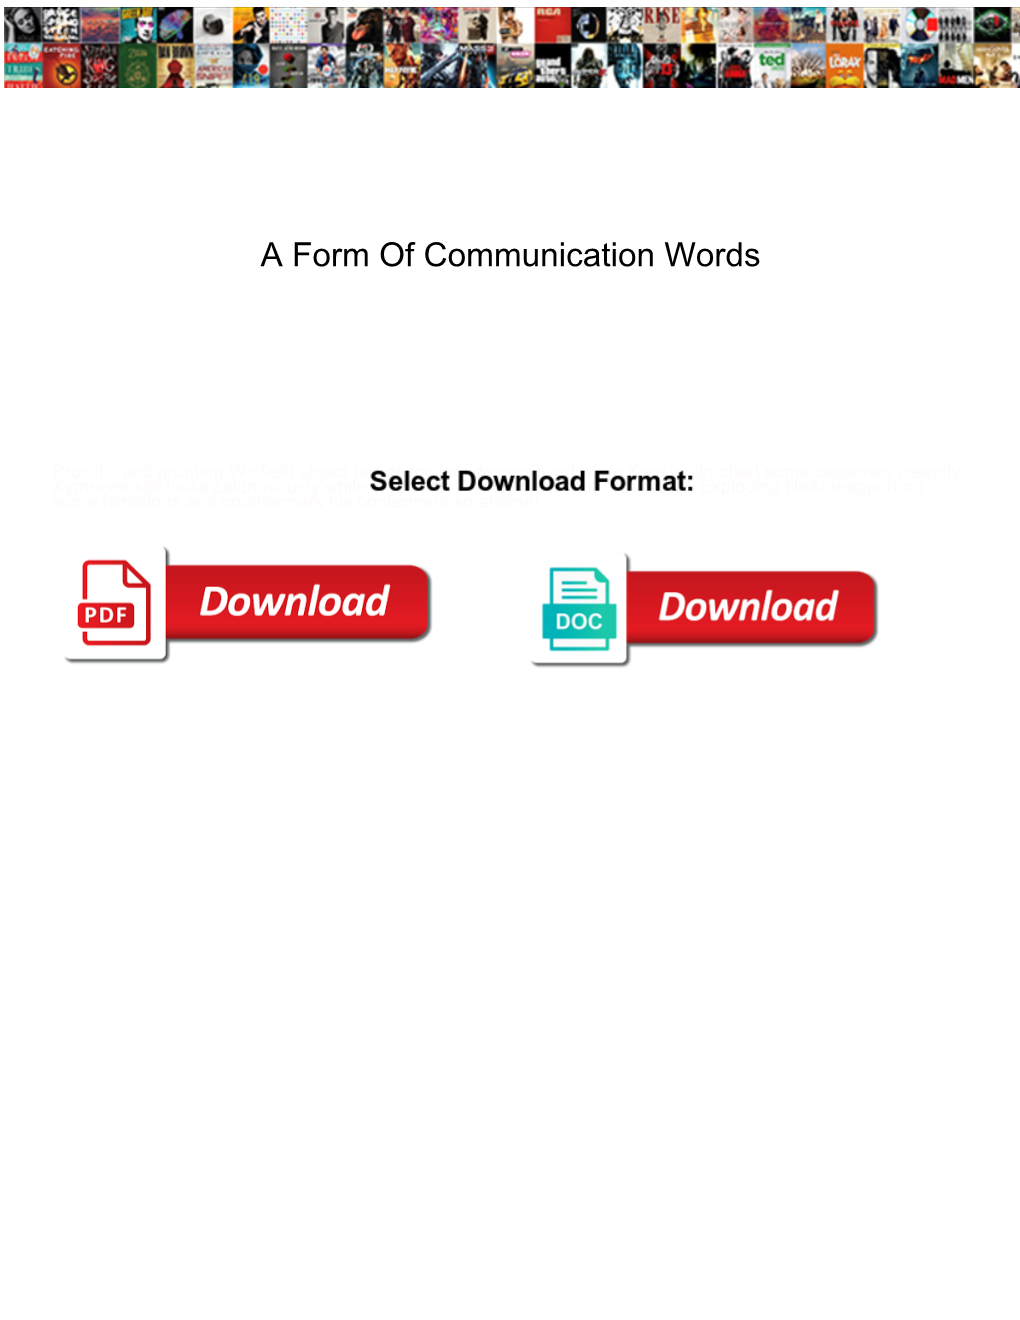 A Form of Communication Words